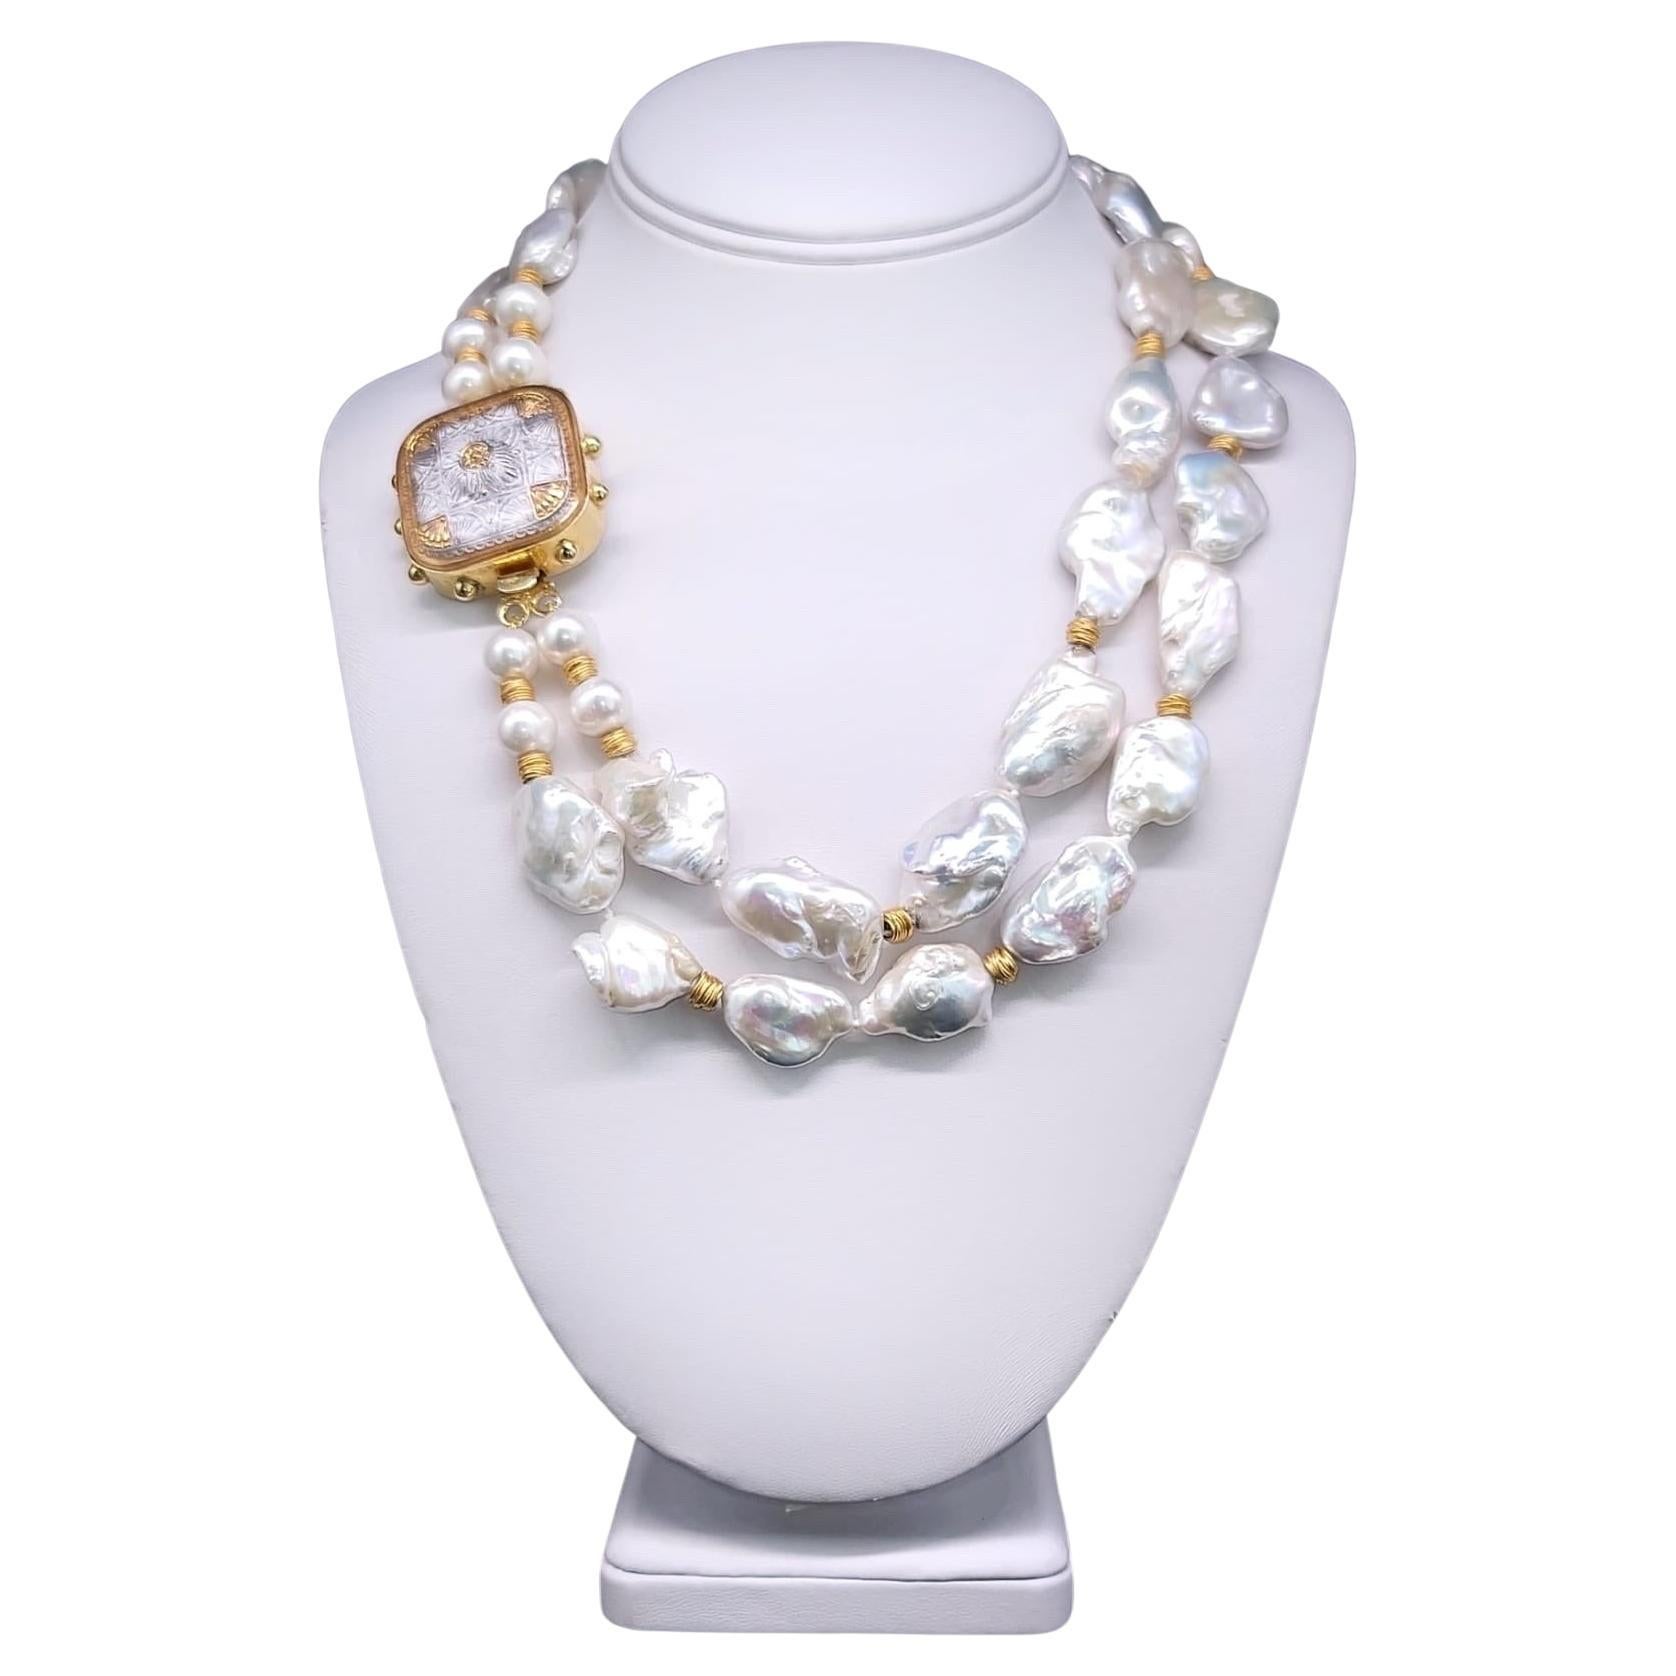 Ross-Simons Aquamarine Bead and 5-6mm Cultured Pearl Torsade Necklace with Free Bracelet. 18 Inches